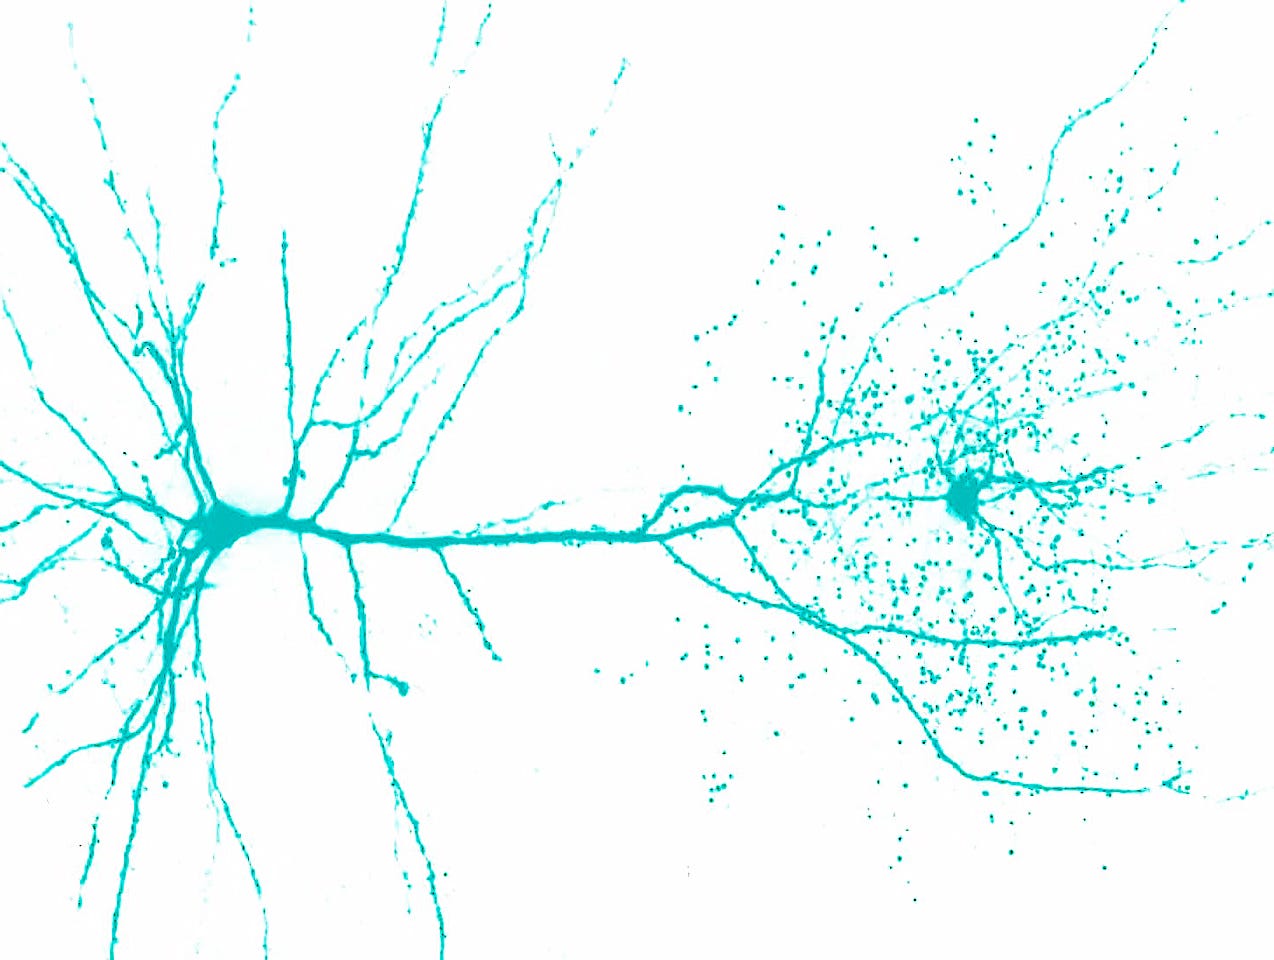 Fig.1A source: [https://www.forbes.com/sites/andreamorris/2018/08/27/scientists-discover-a-new-type-of-brain-cell-in-humans/](https://www.forbes.com/sites/andreamorris/2018/08/27/scientists-discover-a-new-type-of-brain-cell-in-humans/) — modified by myself